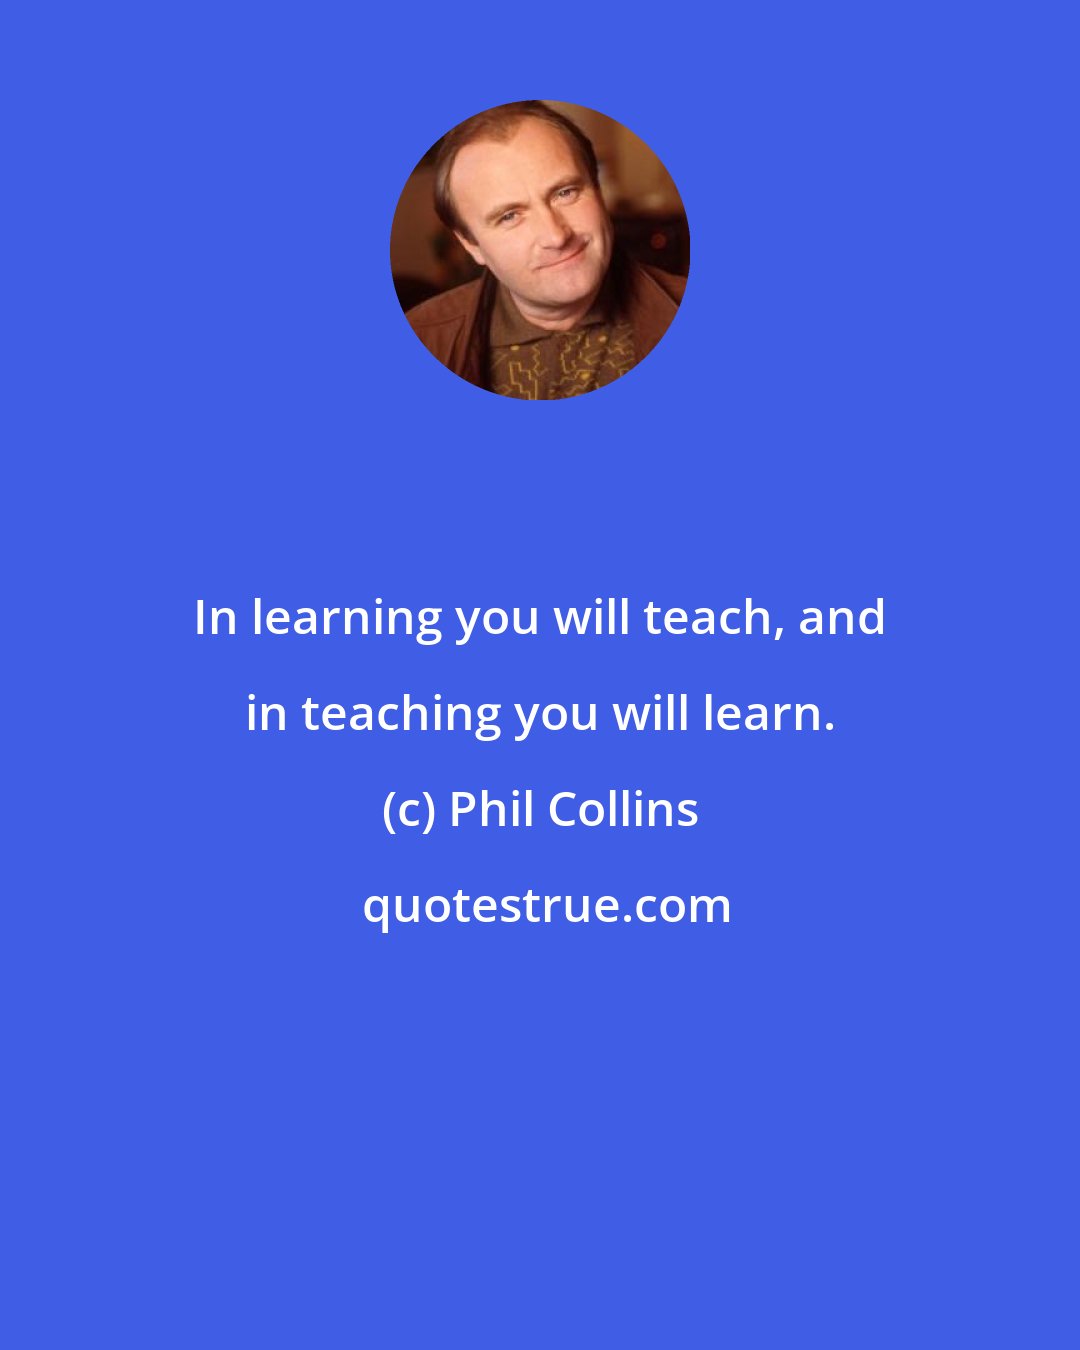 Phil Collins: In learning you will teach, and in teaching you will learn.